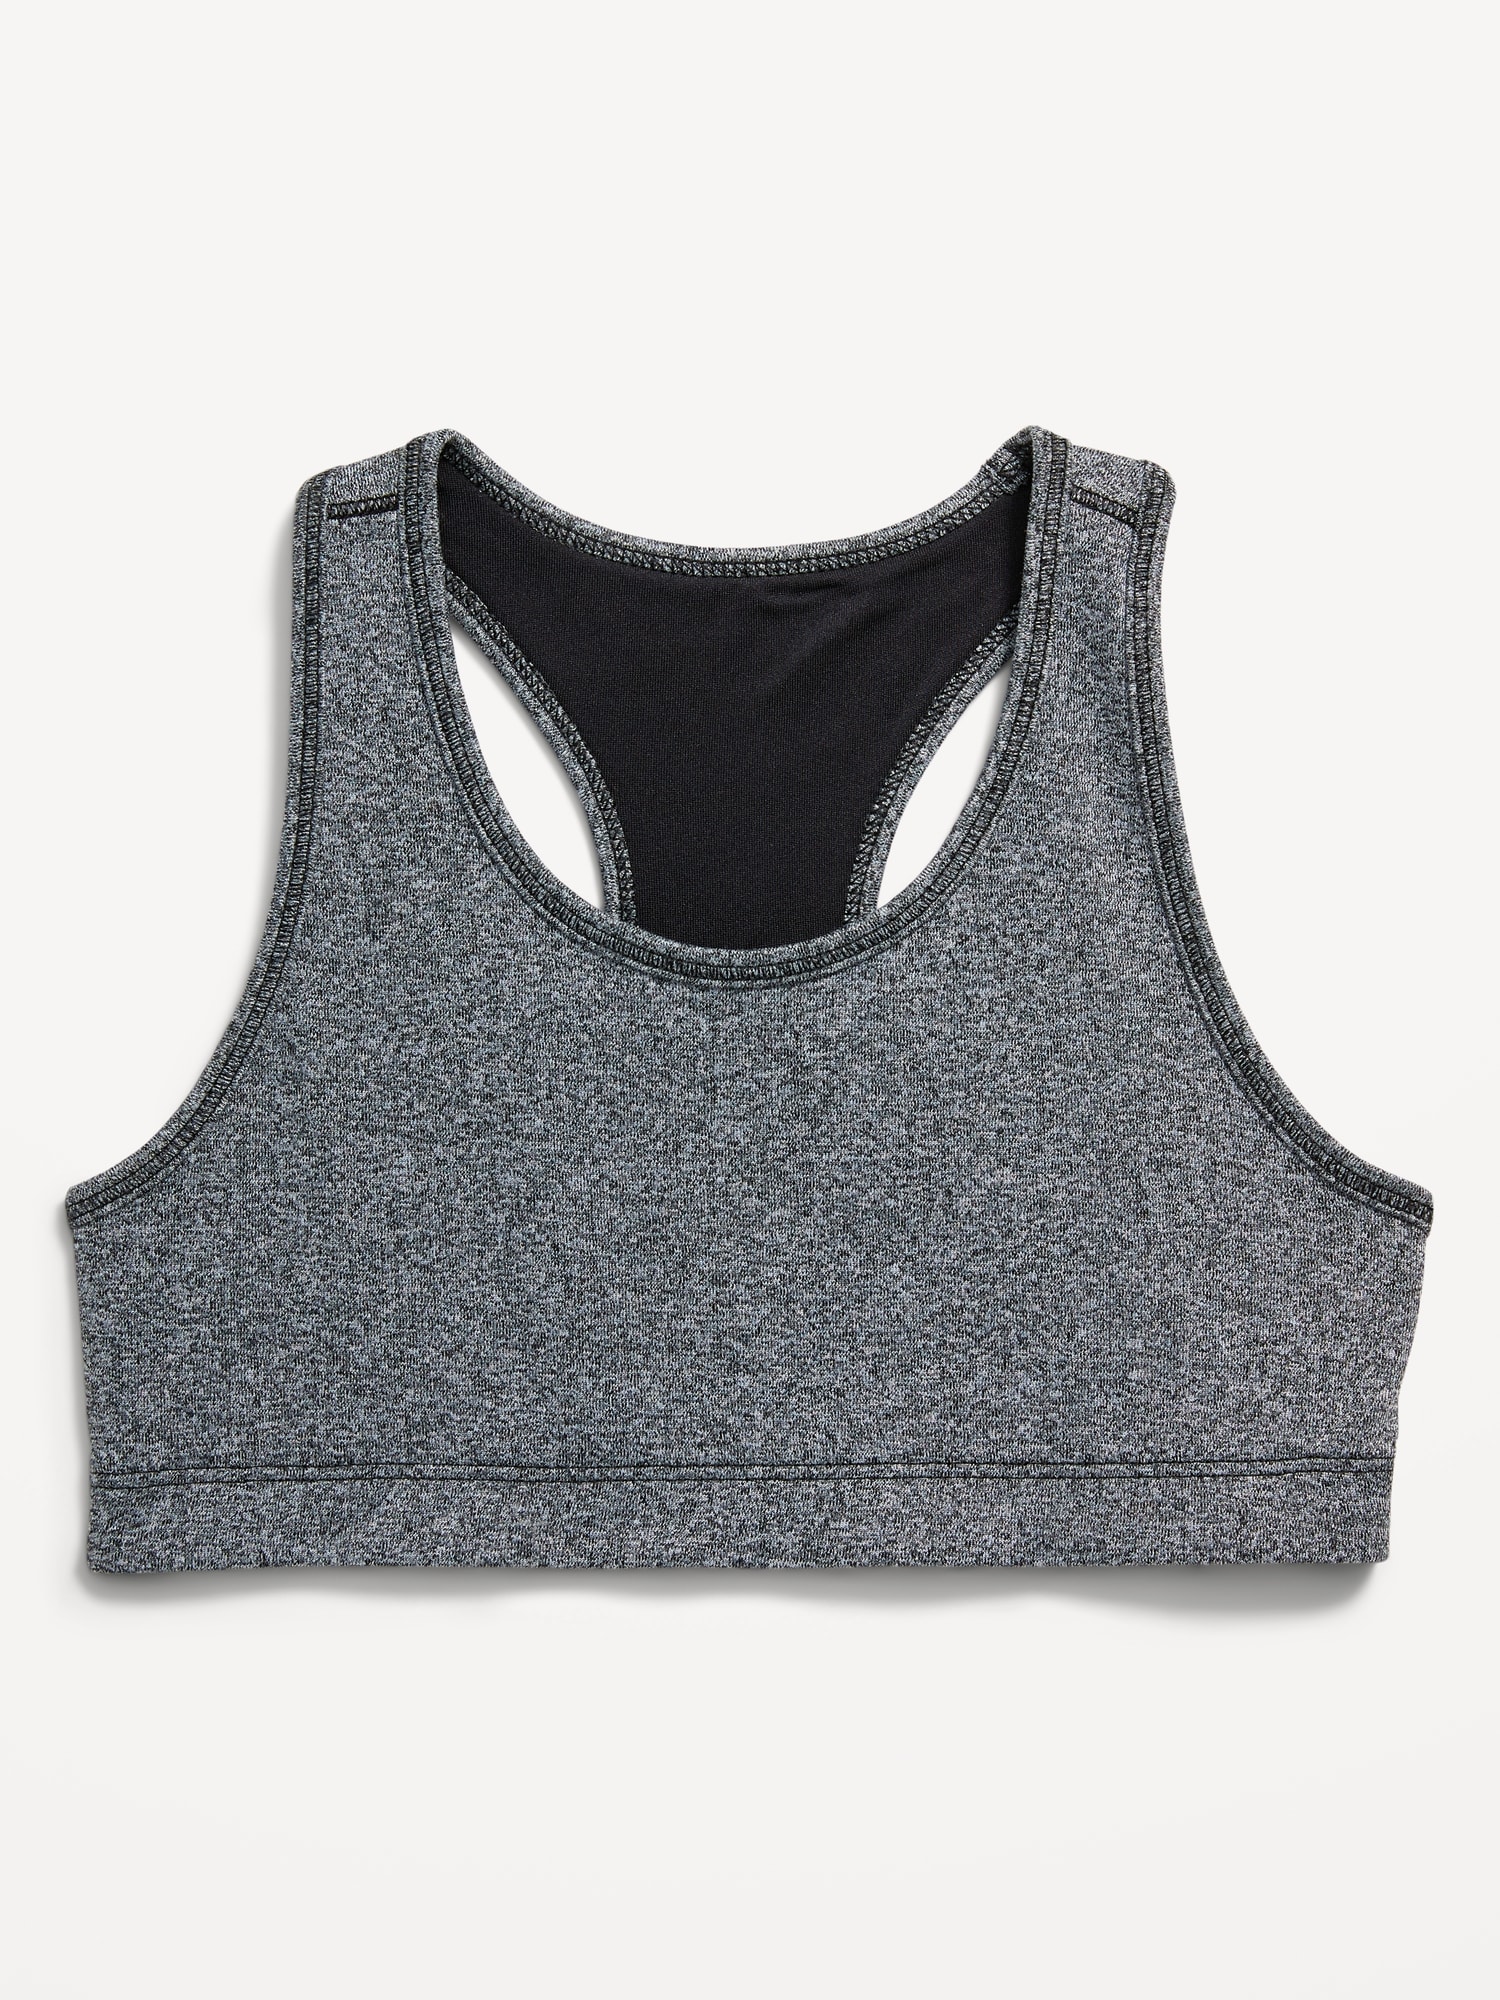 Youth Sports Bras